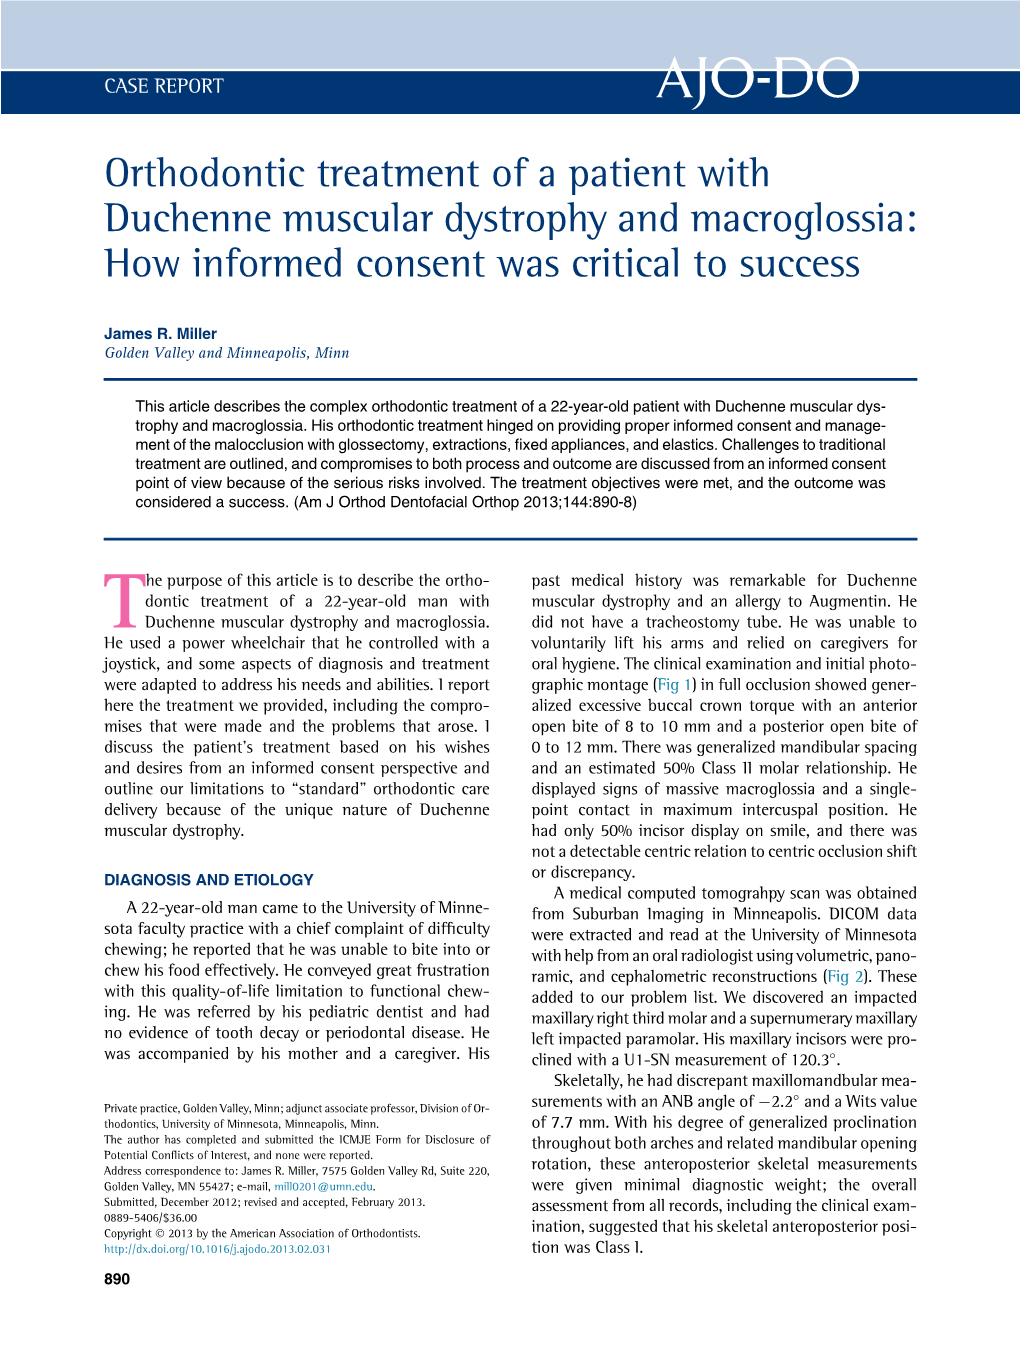 Orthodontic Treatment of a Patient with Duchenne Muscular Dystrophy and Macroglossia: How Informed Consent Was Critical to Success